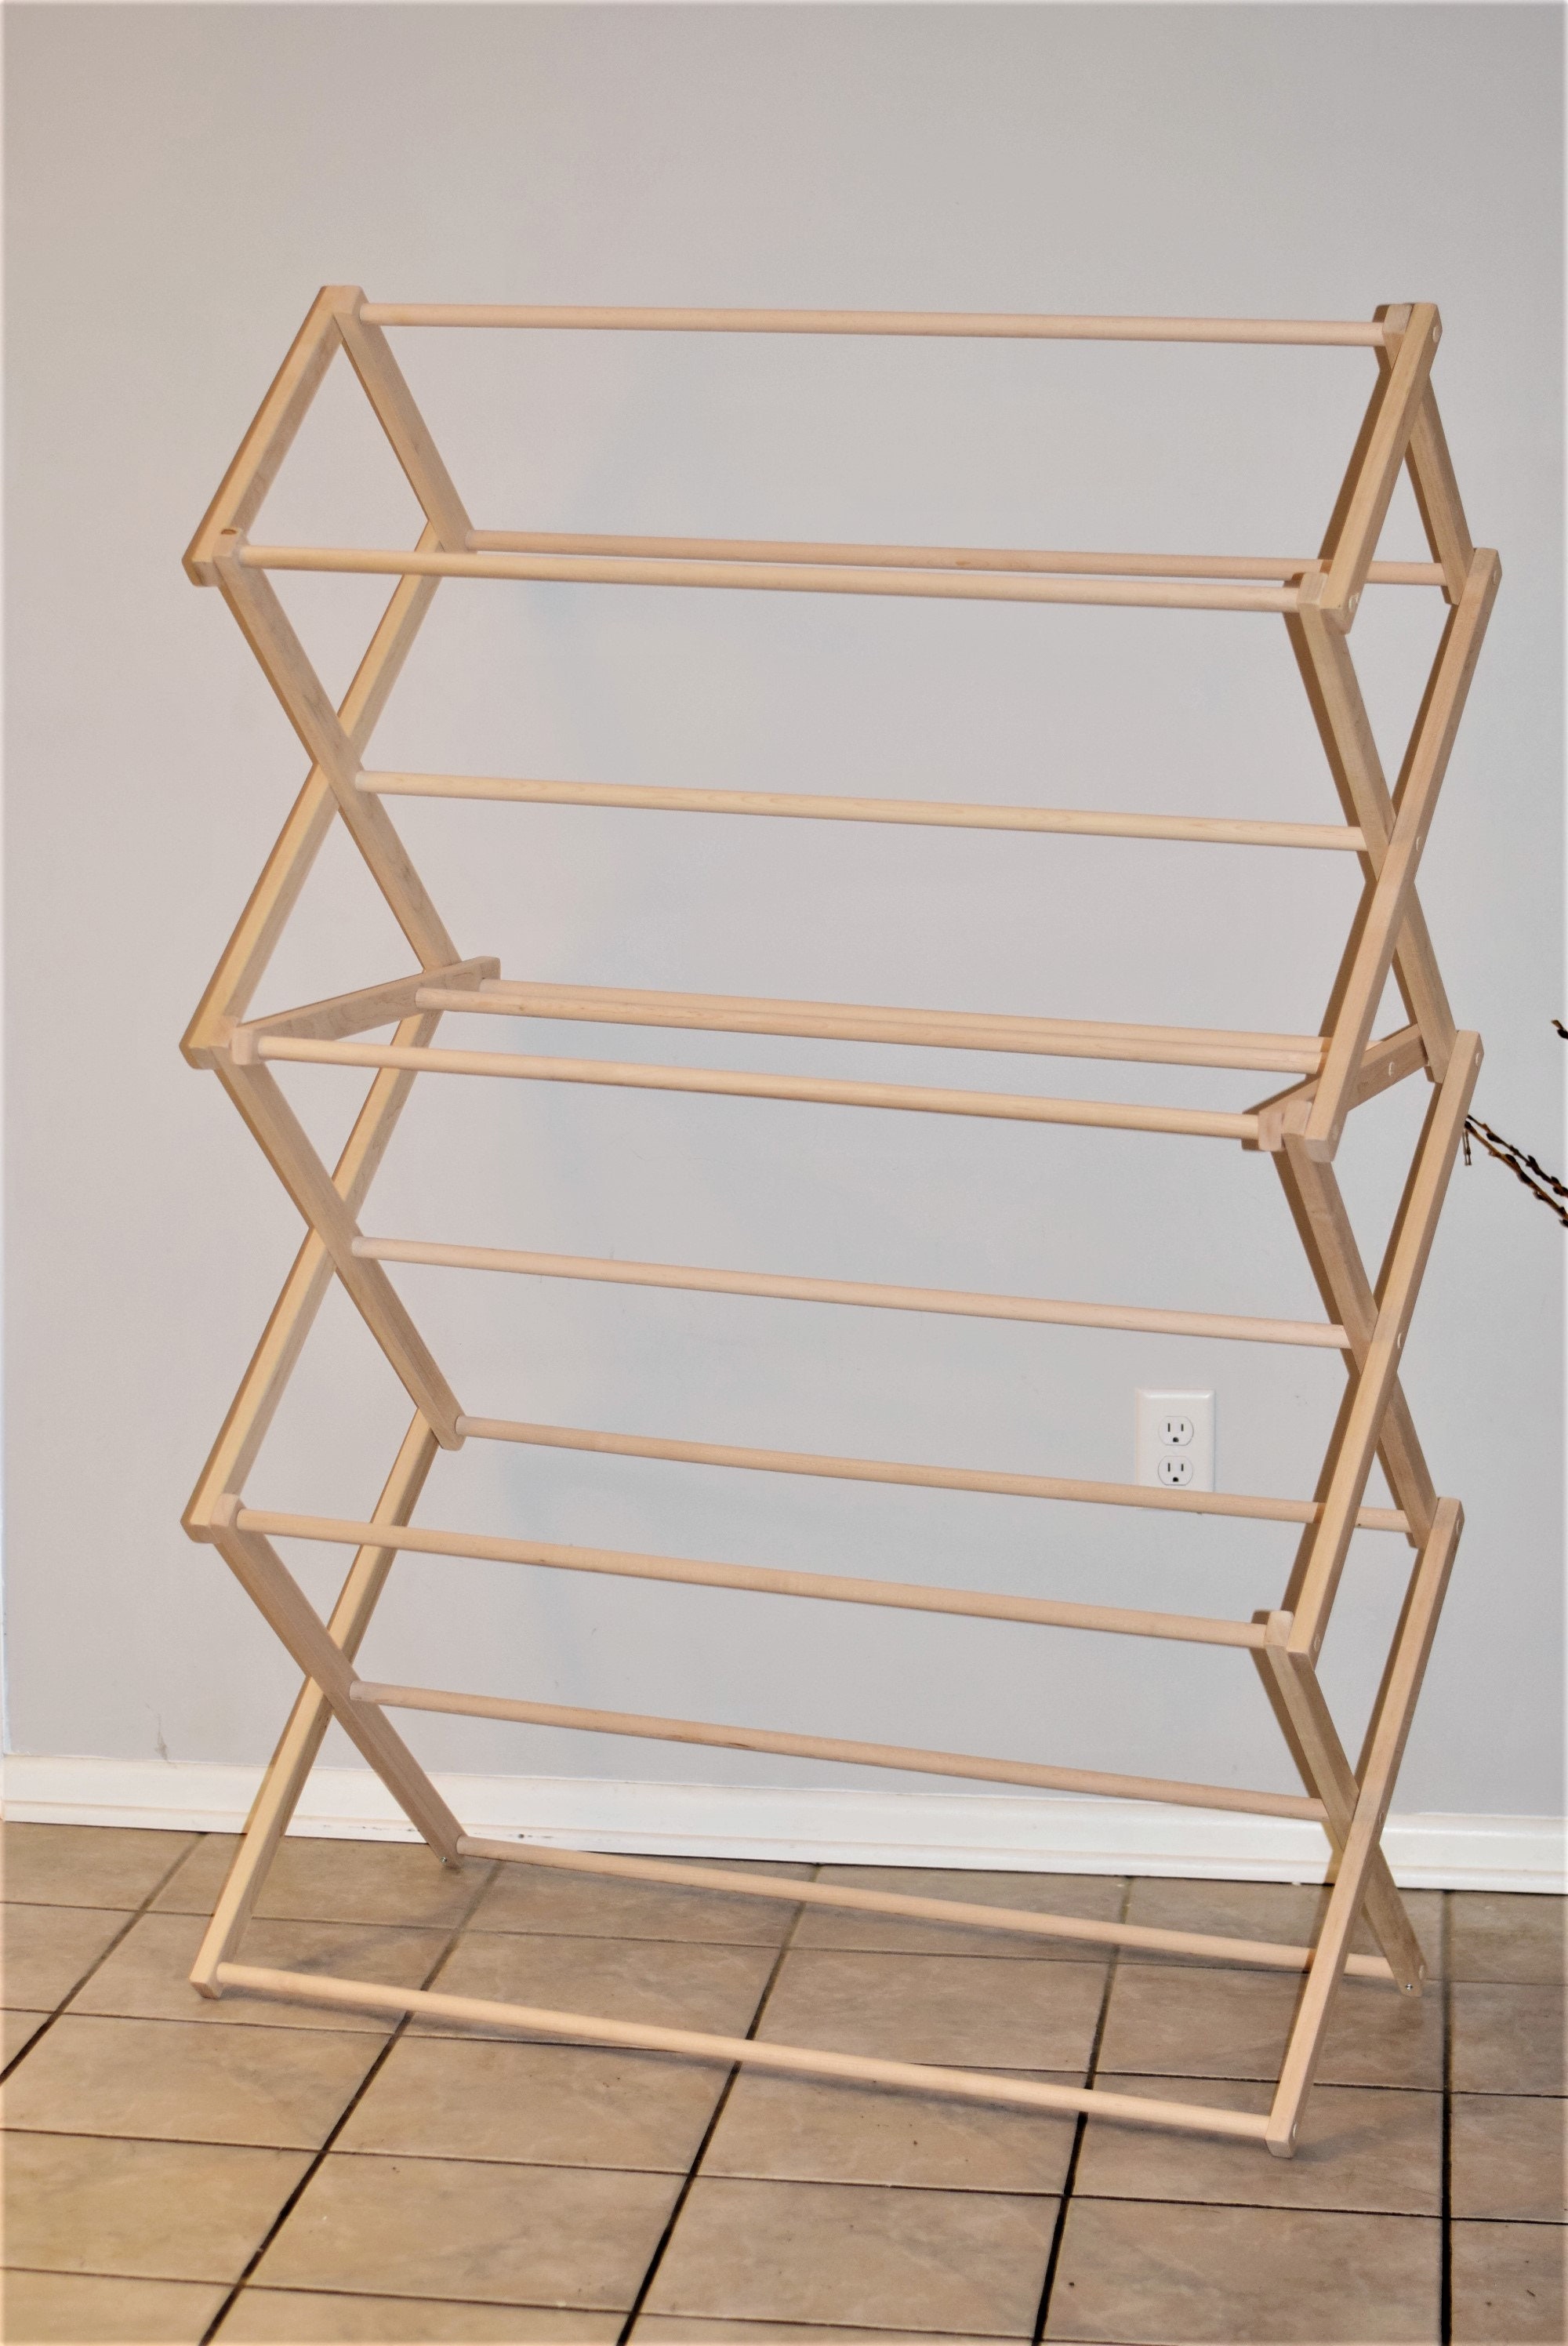 Amish Wooden Tabletop Folding Clothes Drying Rack.